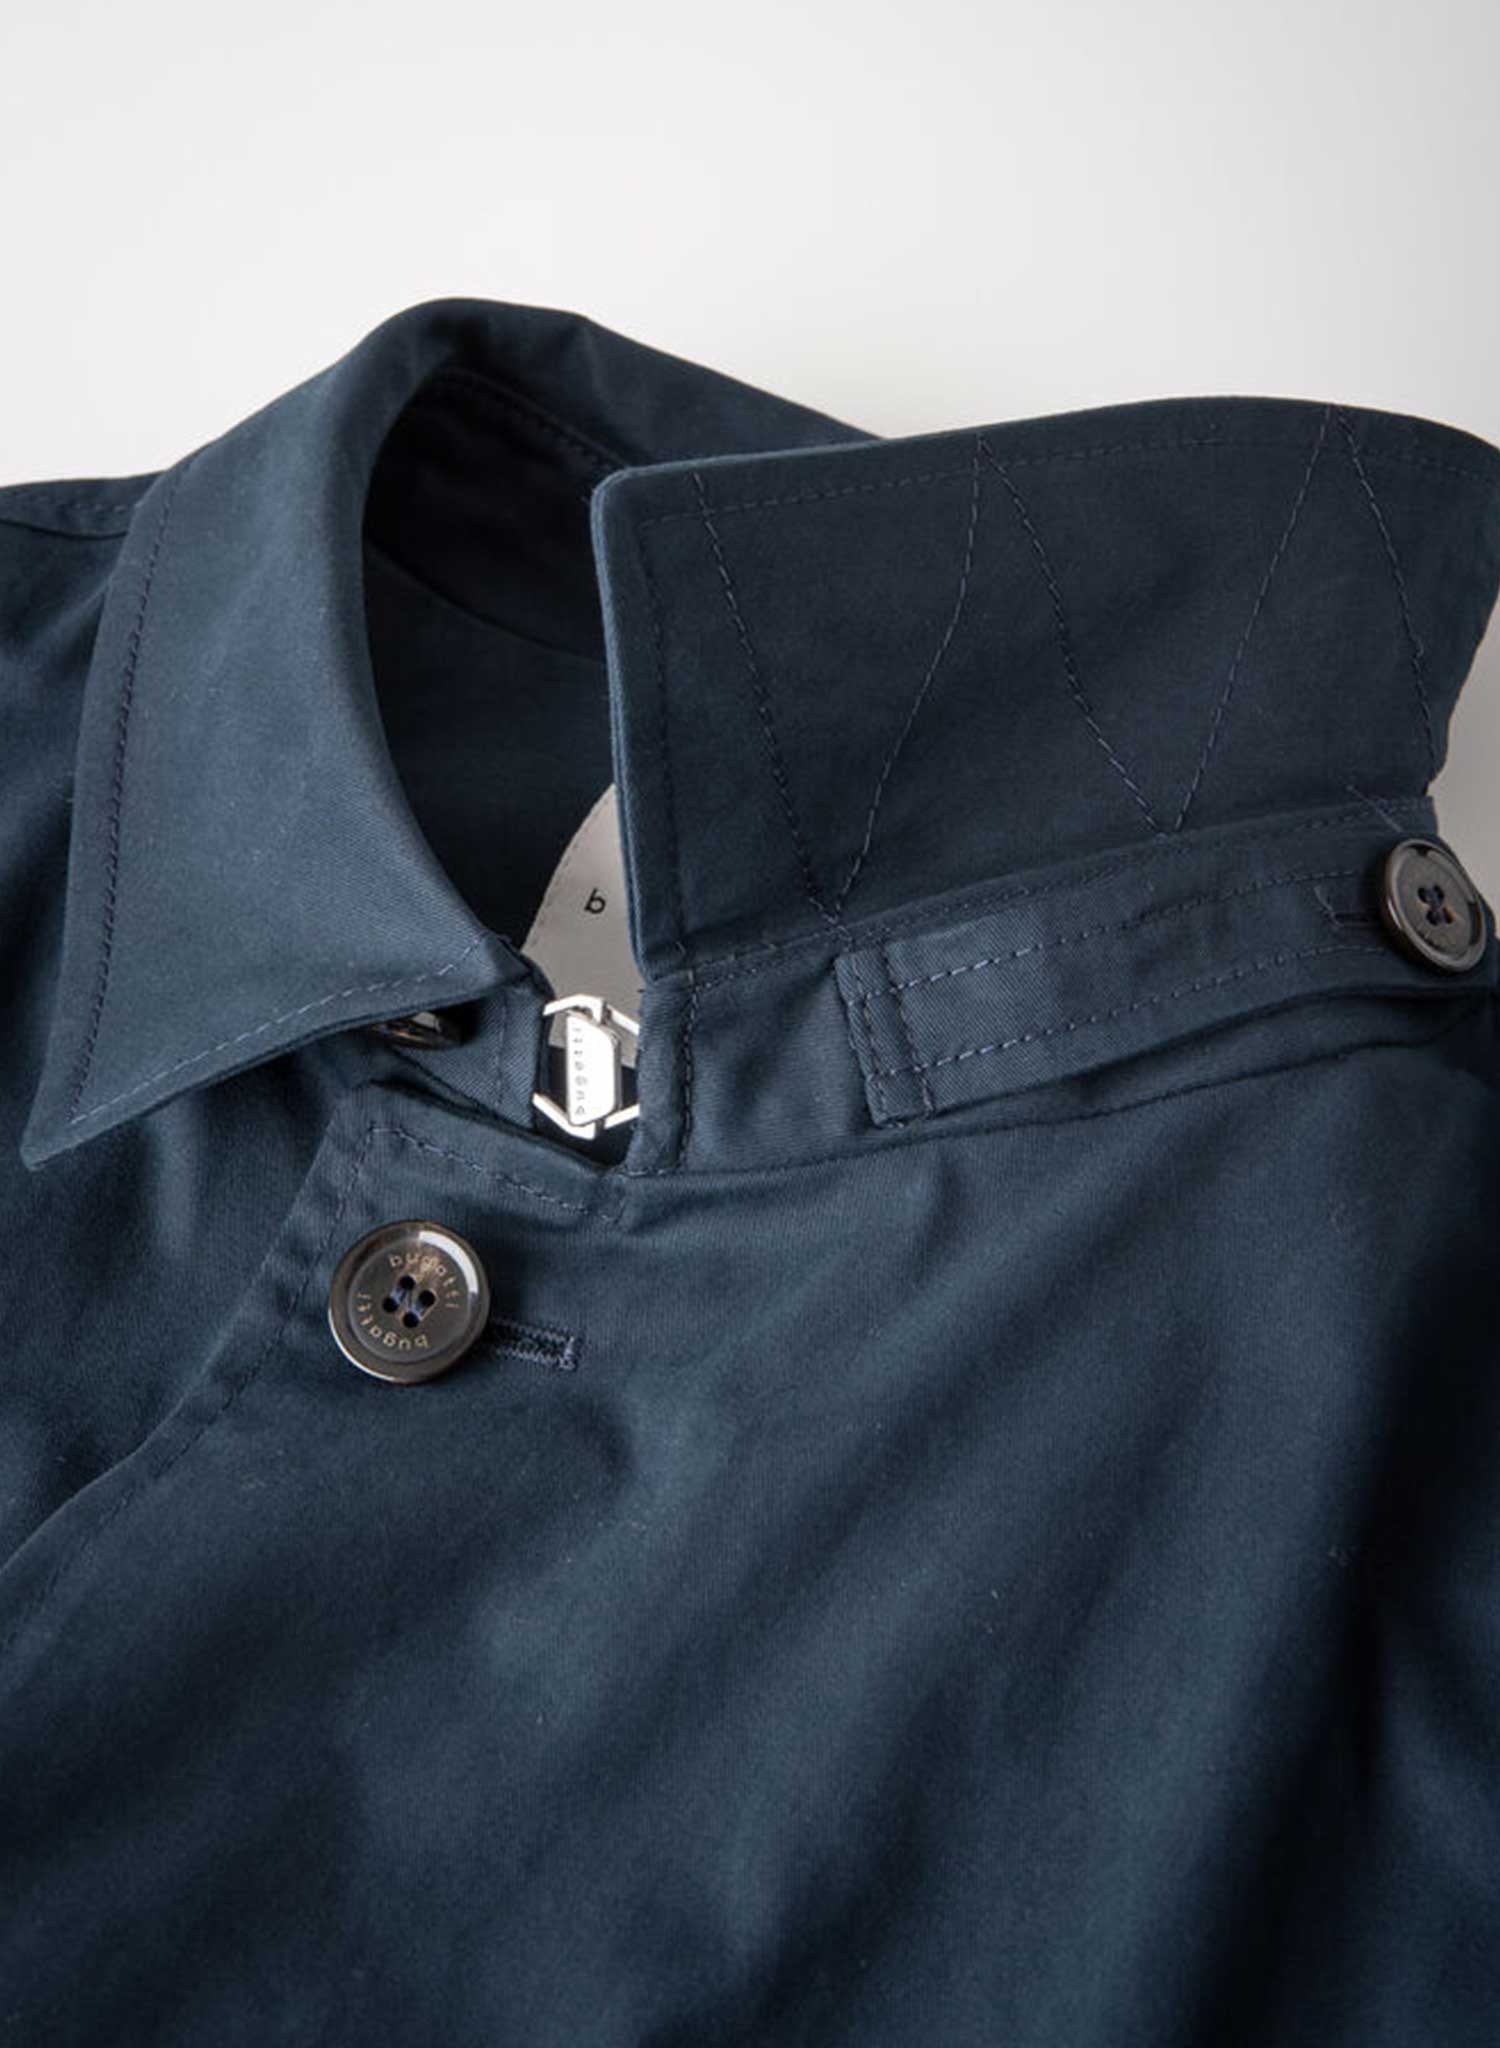 Bugatti 3/4 Poplin Cotton Coat Navy cropped to show Collar and button